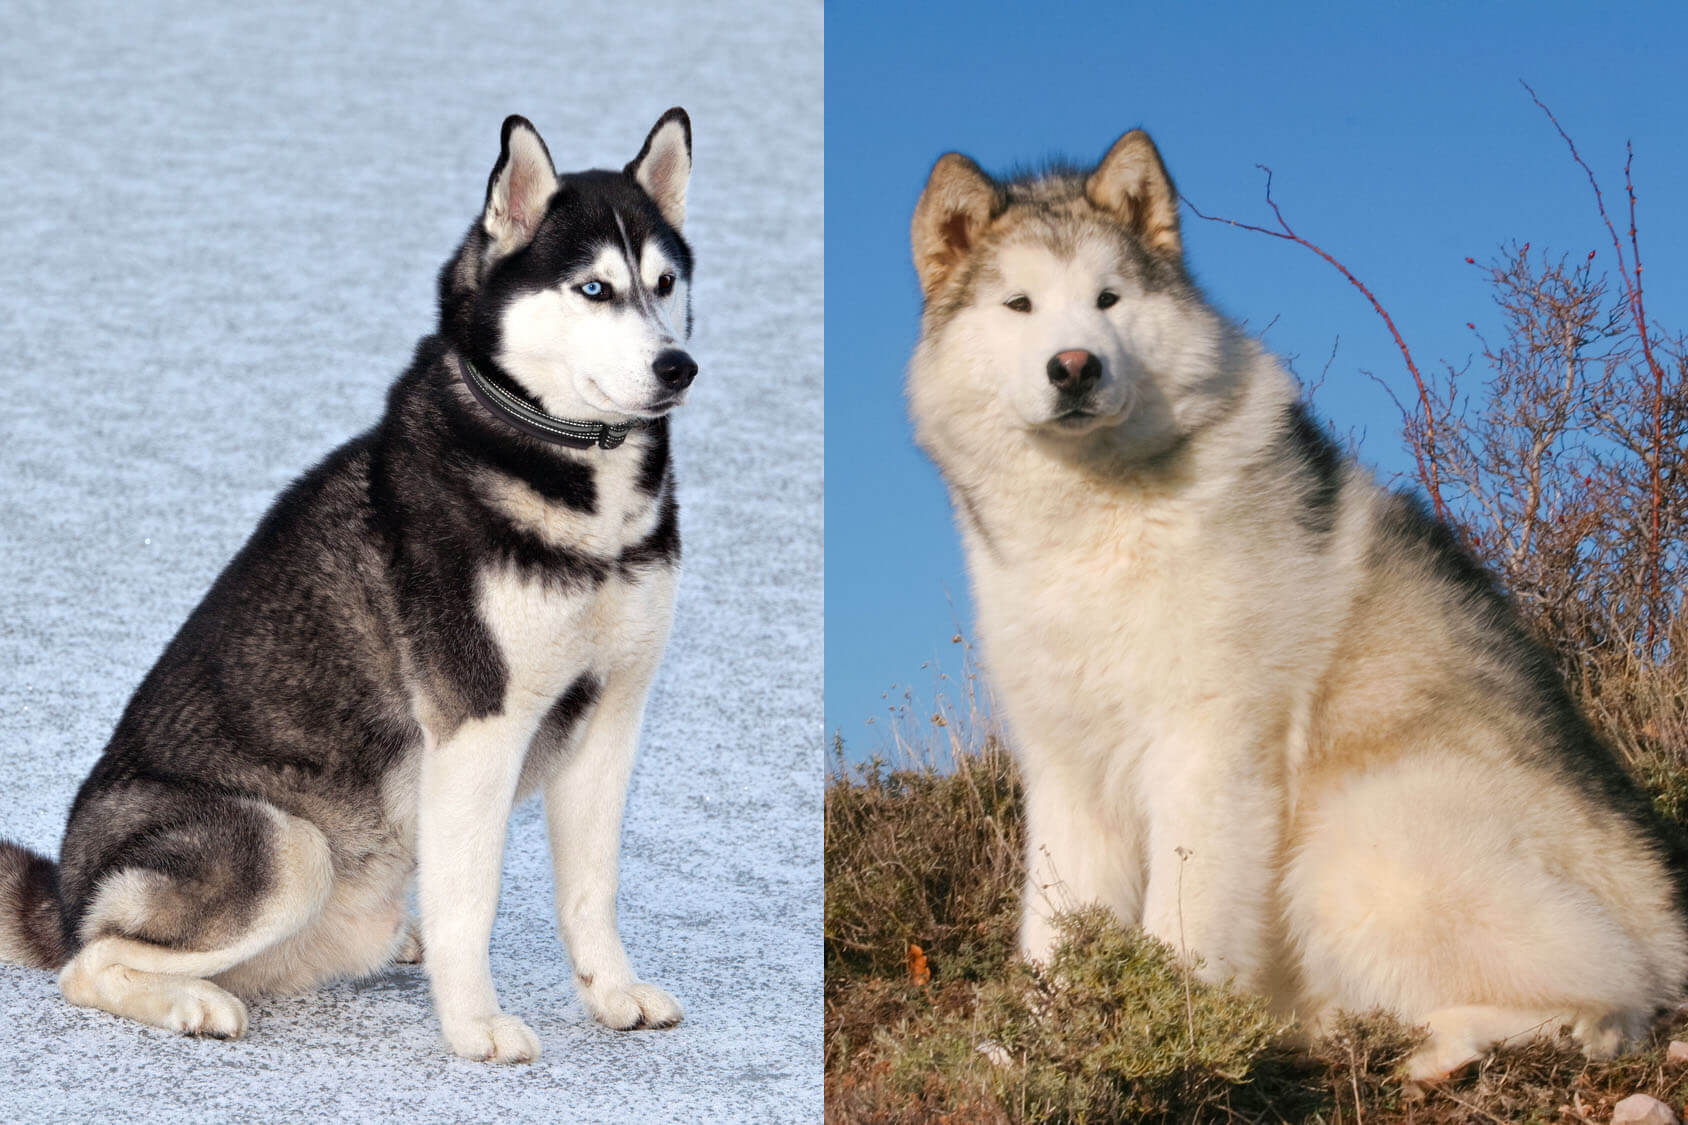 Husky And Malamute: Can You Tell Their Differences? Best Shampoo for Husky Puppy